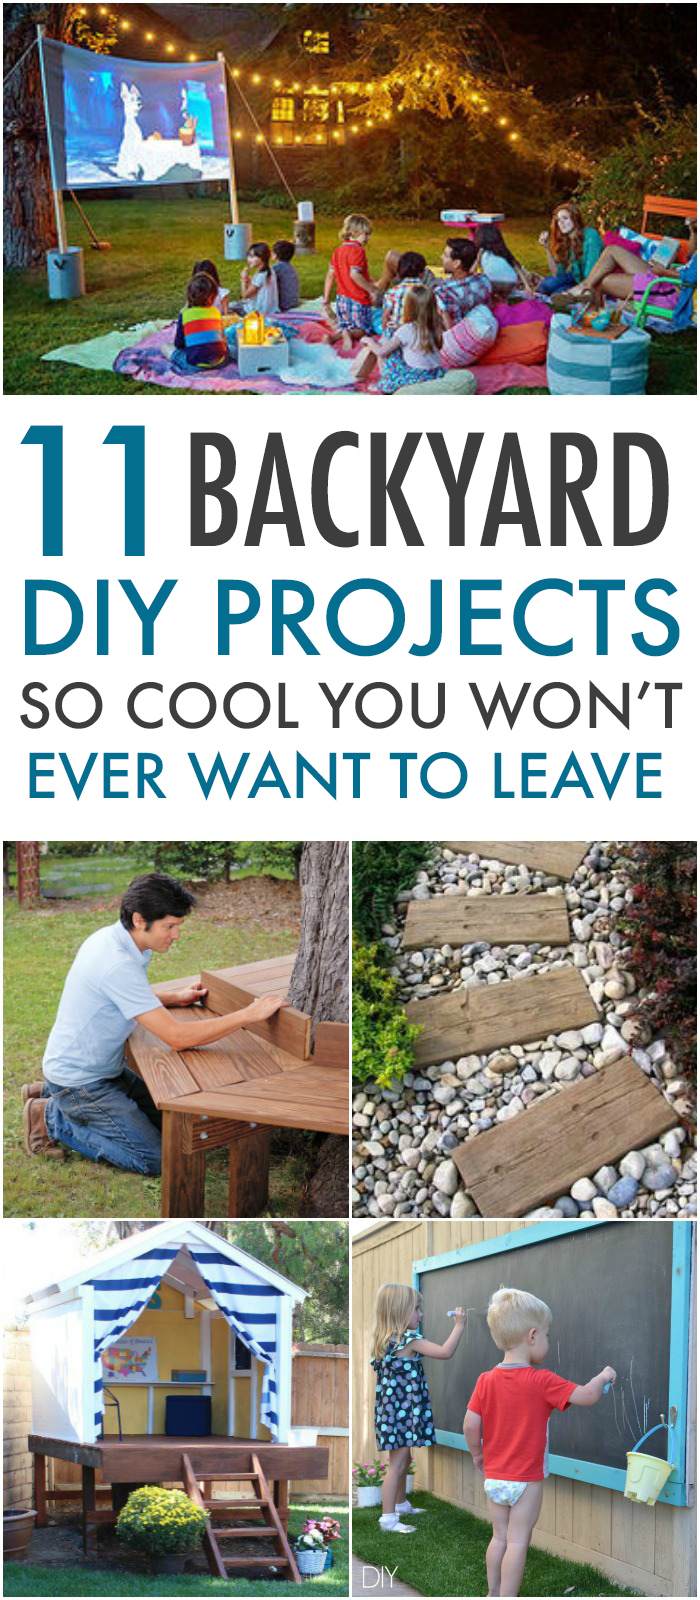 11 Yard DIY'S So Cool You Won't Want To Leave - Love and Marriage - 11 Yard DIY'S So Cool You Won't Want To Leave - Love and Marriage -   17 diy Projects for summer ideas